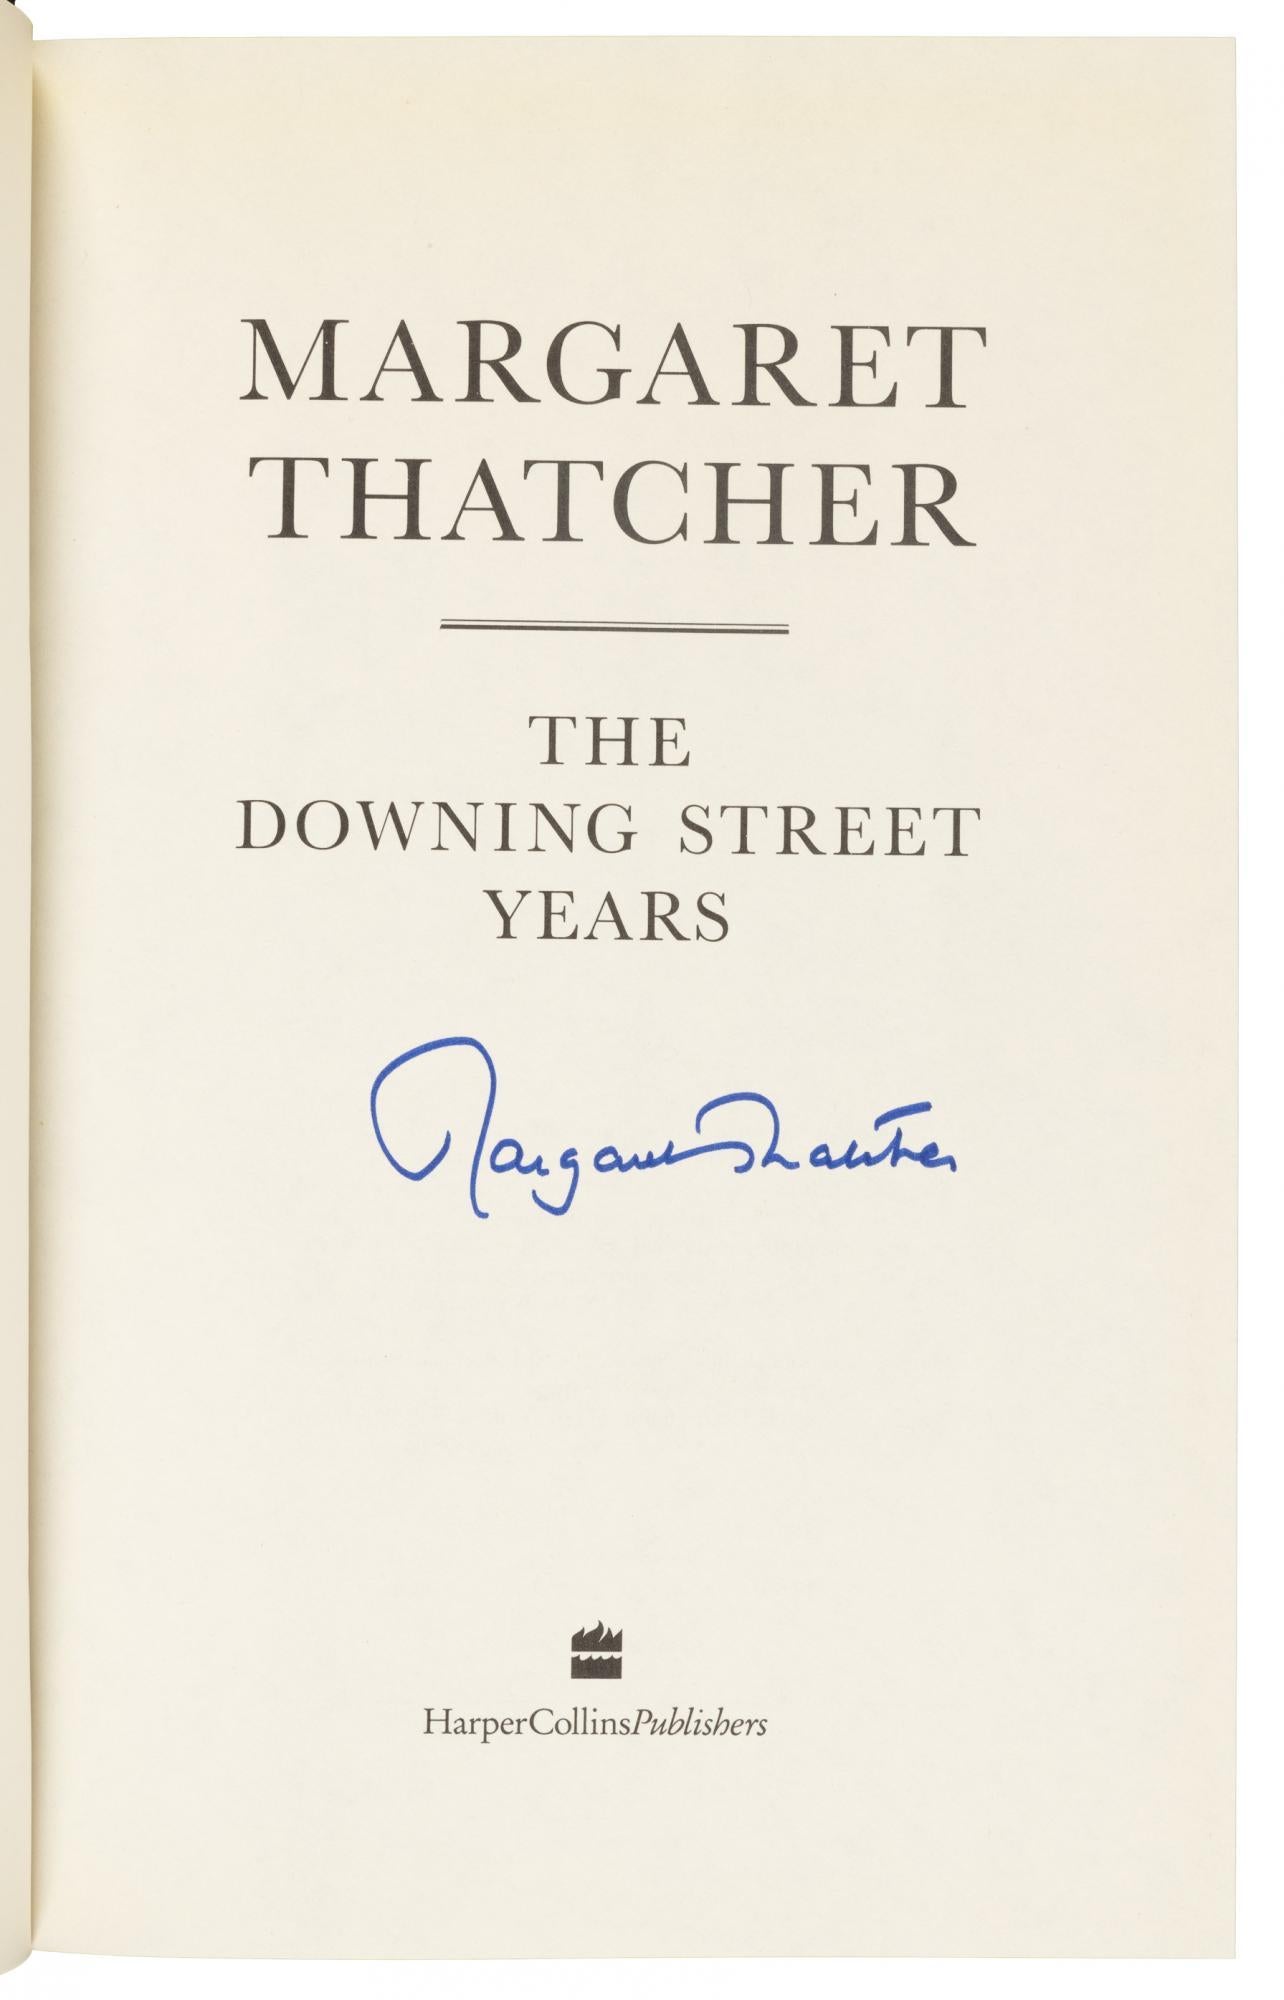 Thatcher, Margaret. The Downing Street Years, New York: Harper/Collins, 1993. First Edition, Signed by Margaret Thatcher in blue pen on title page. Octavo in original boards and dust jacket. 

Presented is a signed, first edition of Margaret